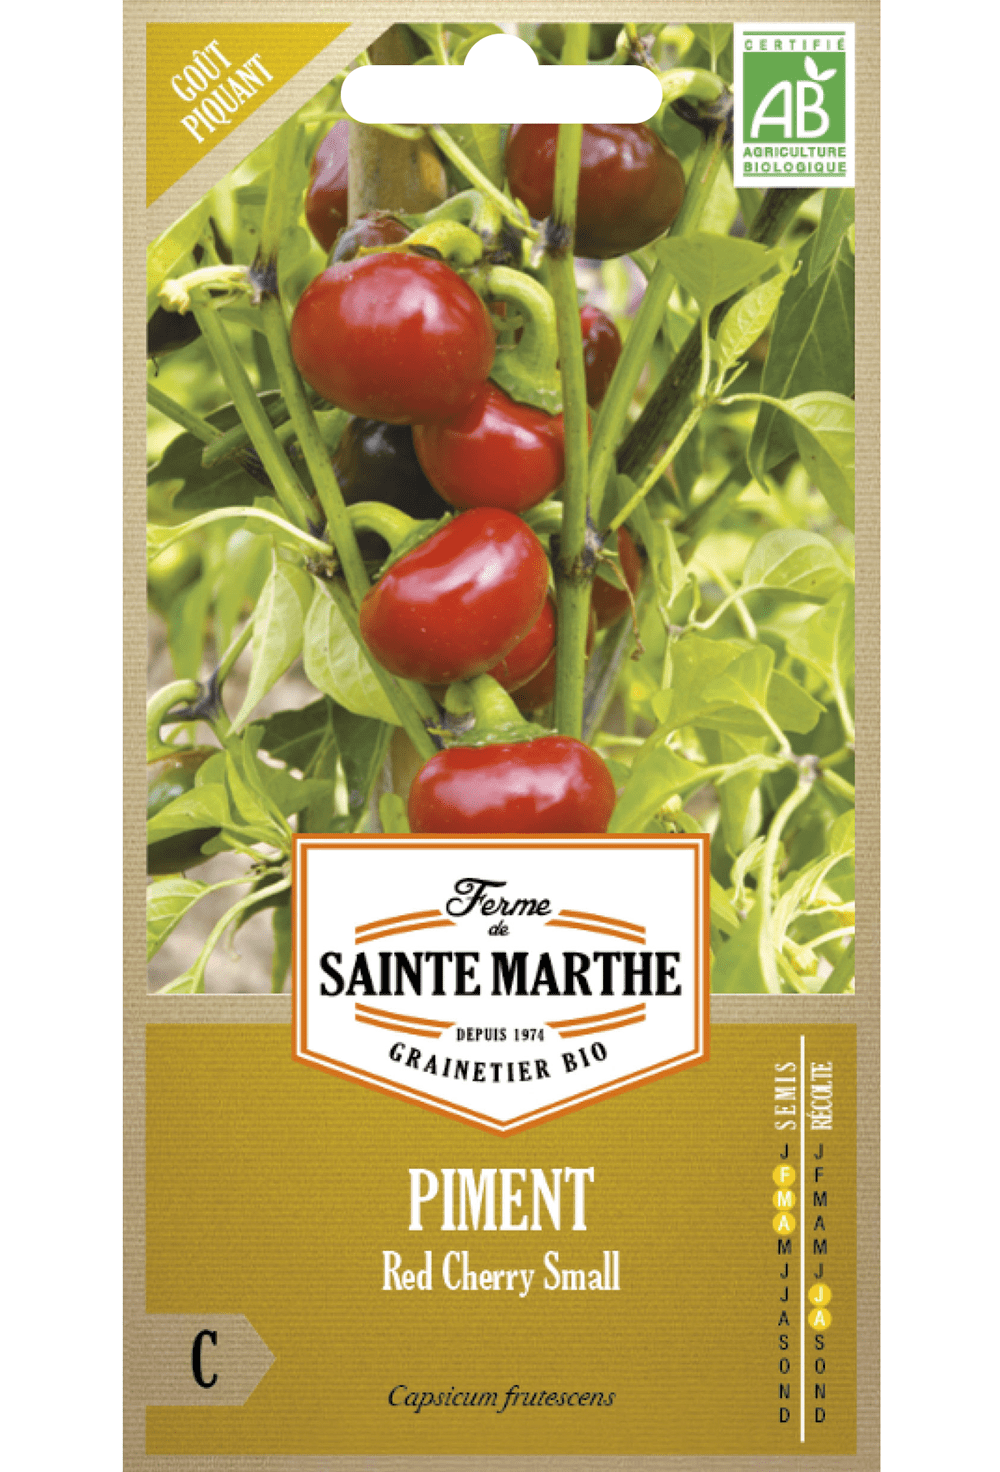 Piment Red Cherry Small